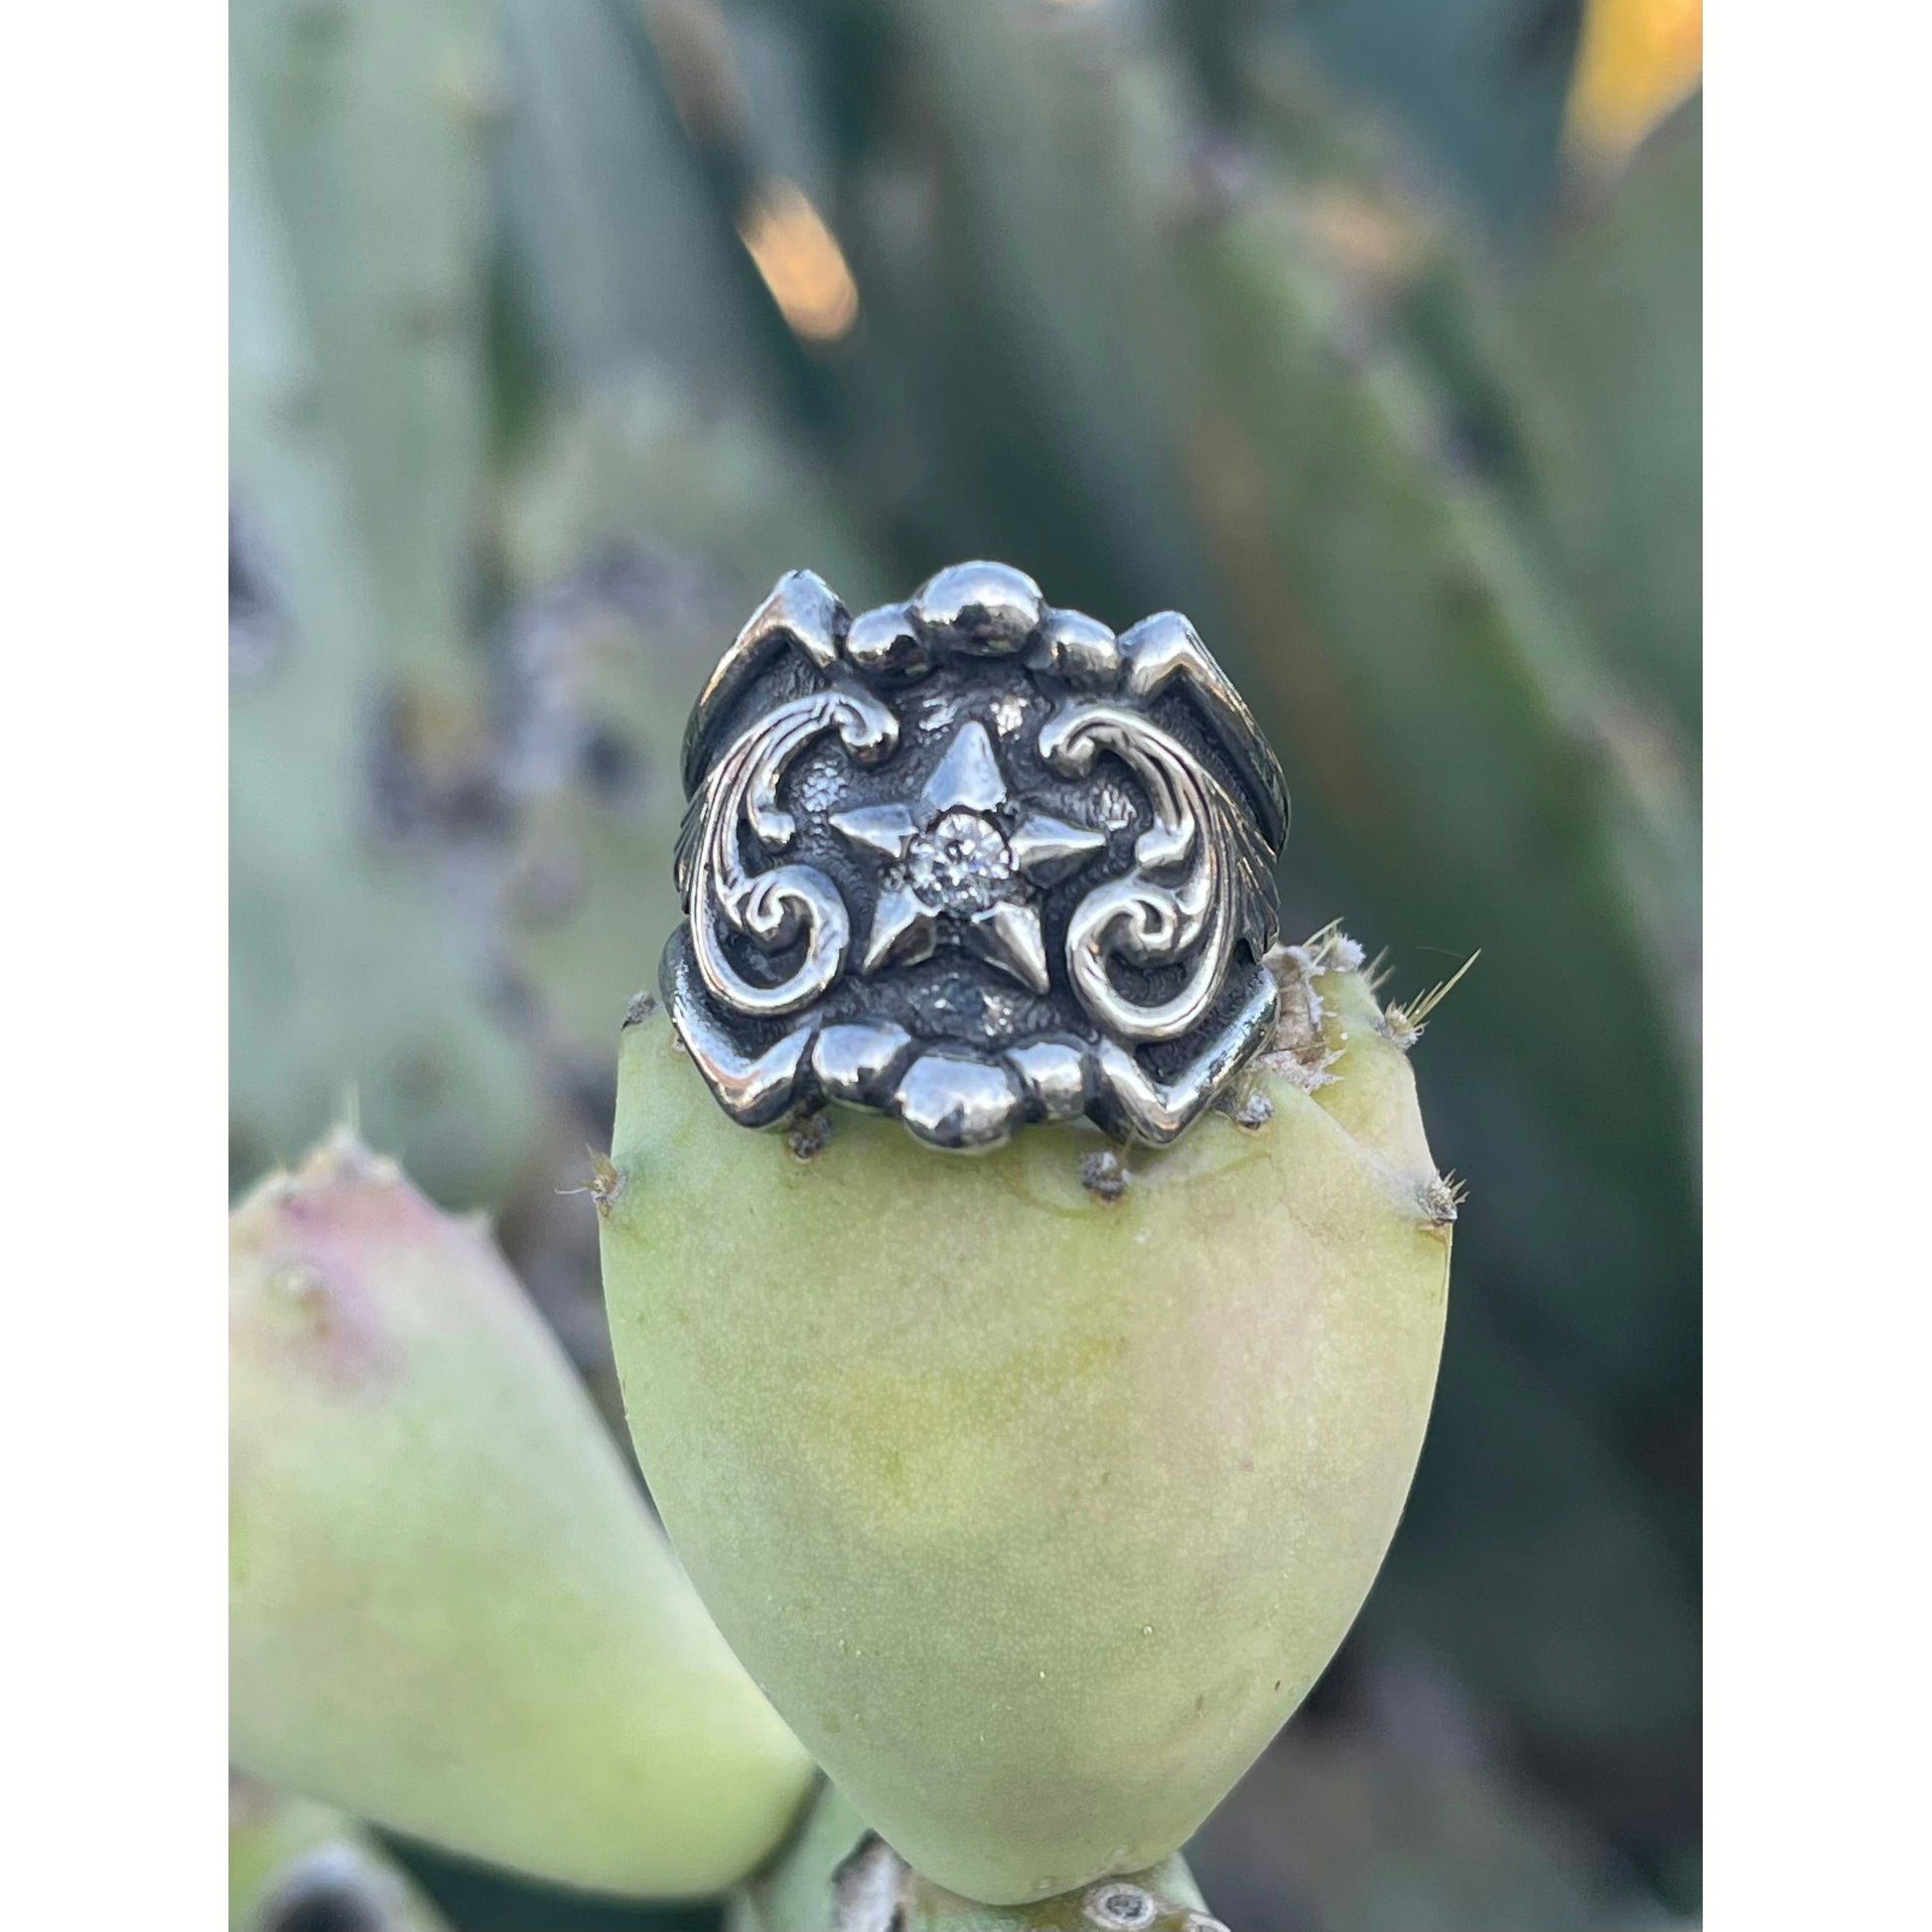 "Texas Star" is a solid sterling silver ring that has a unique border featuring an overlaid star in the setting and overlaid western style engraved scrolling on either side of the tapered band.